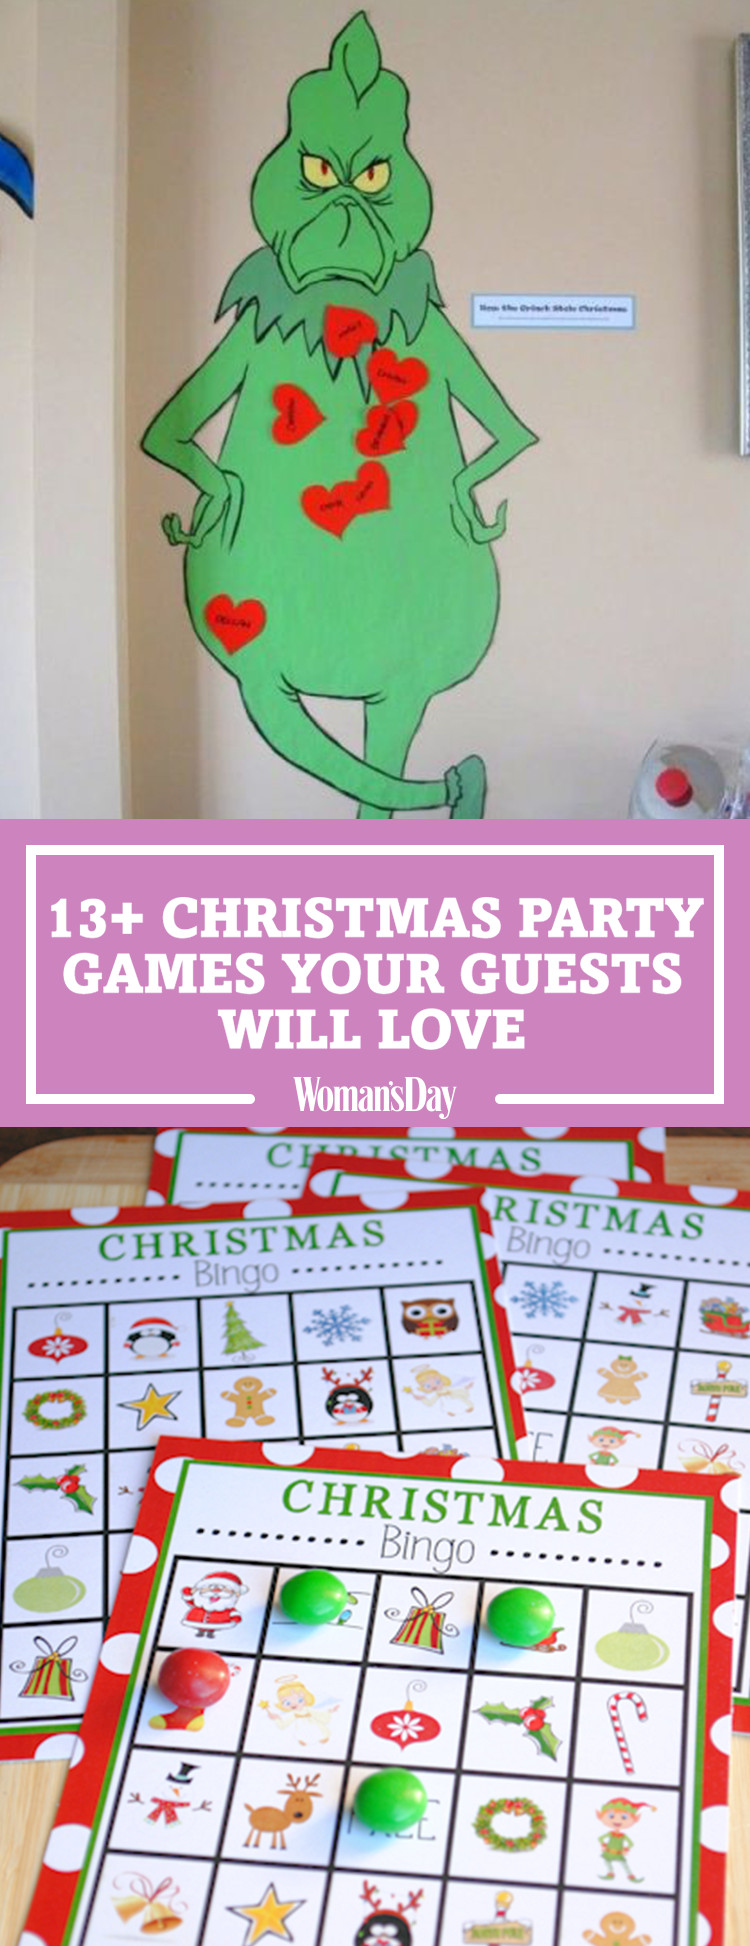 Fun Staff Christmas Party Ideas
 17 Fun Christmas Party Games for Kids DIY Holiday Party